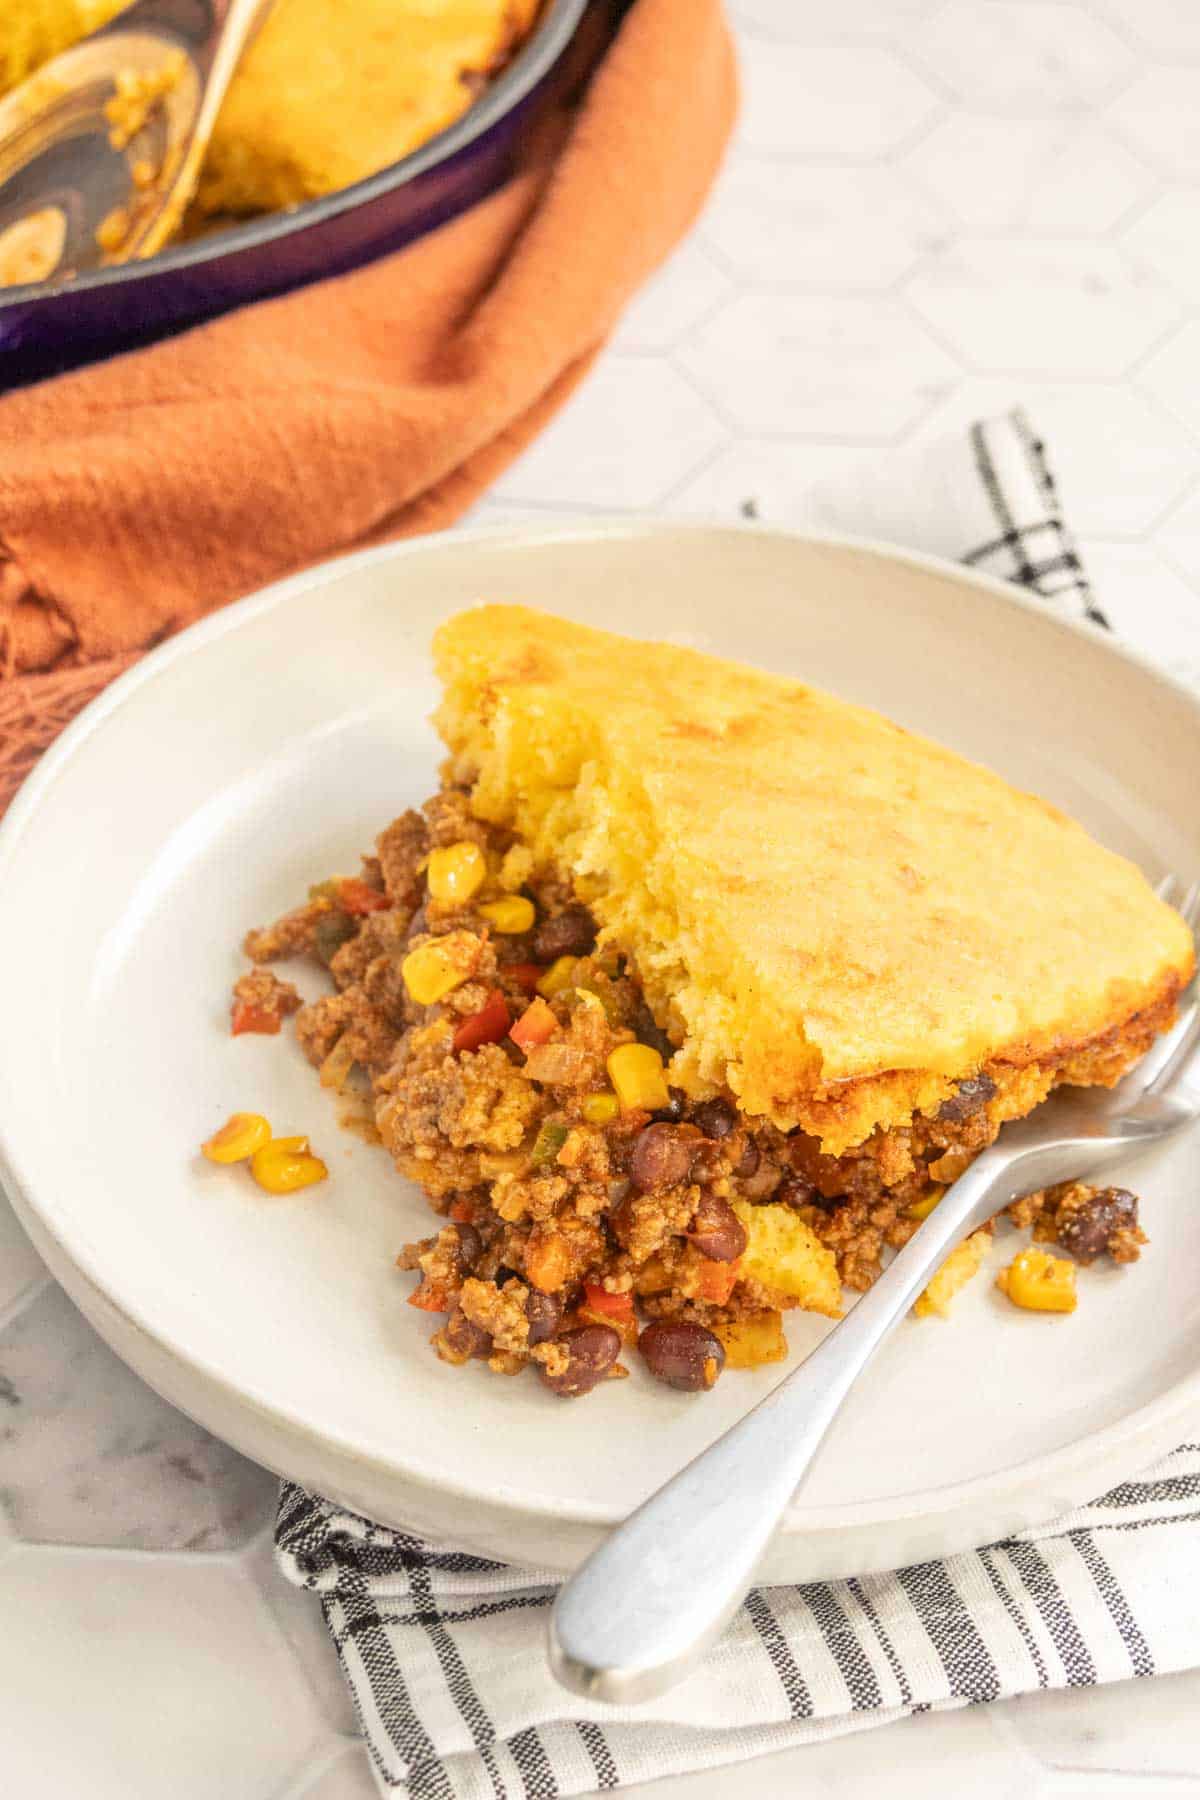 A serving of cornbread-topped beef and bean casserole on a white plate with a spoon, with the rest of the casserole visible in the background.